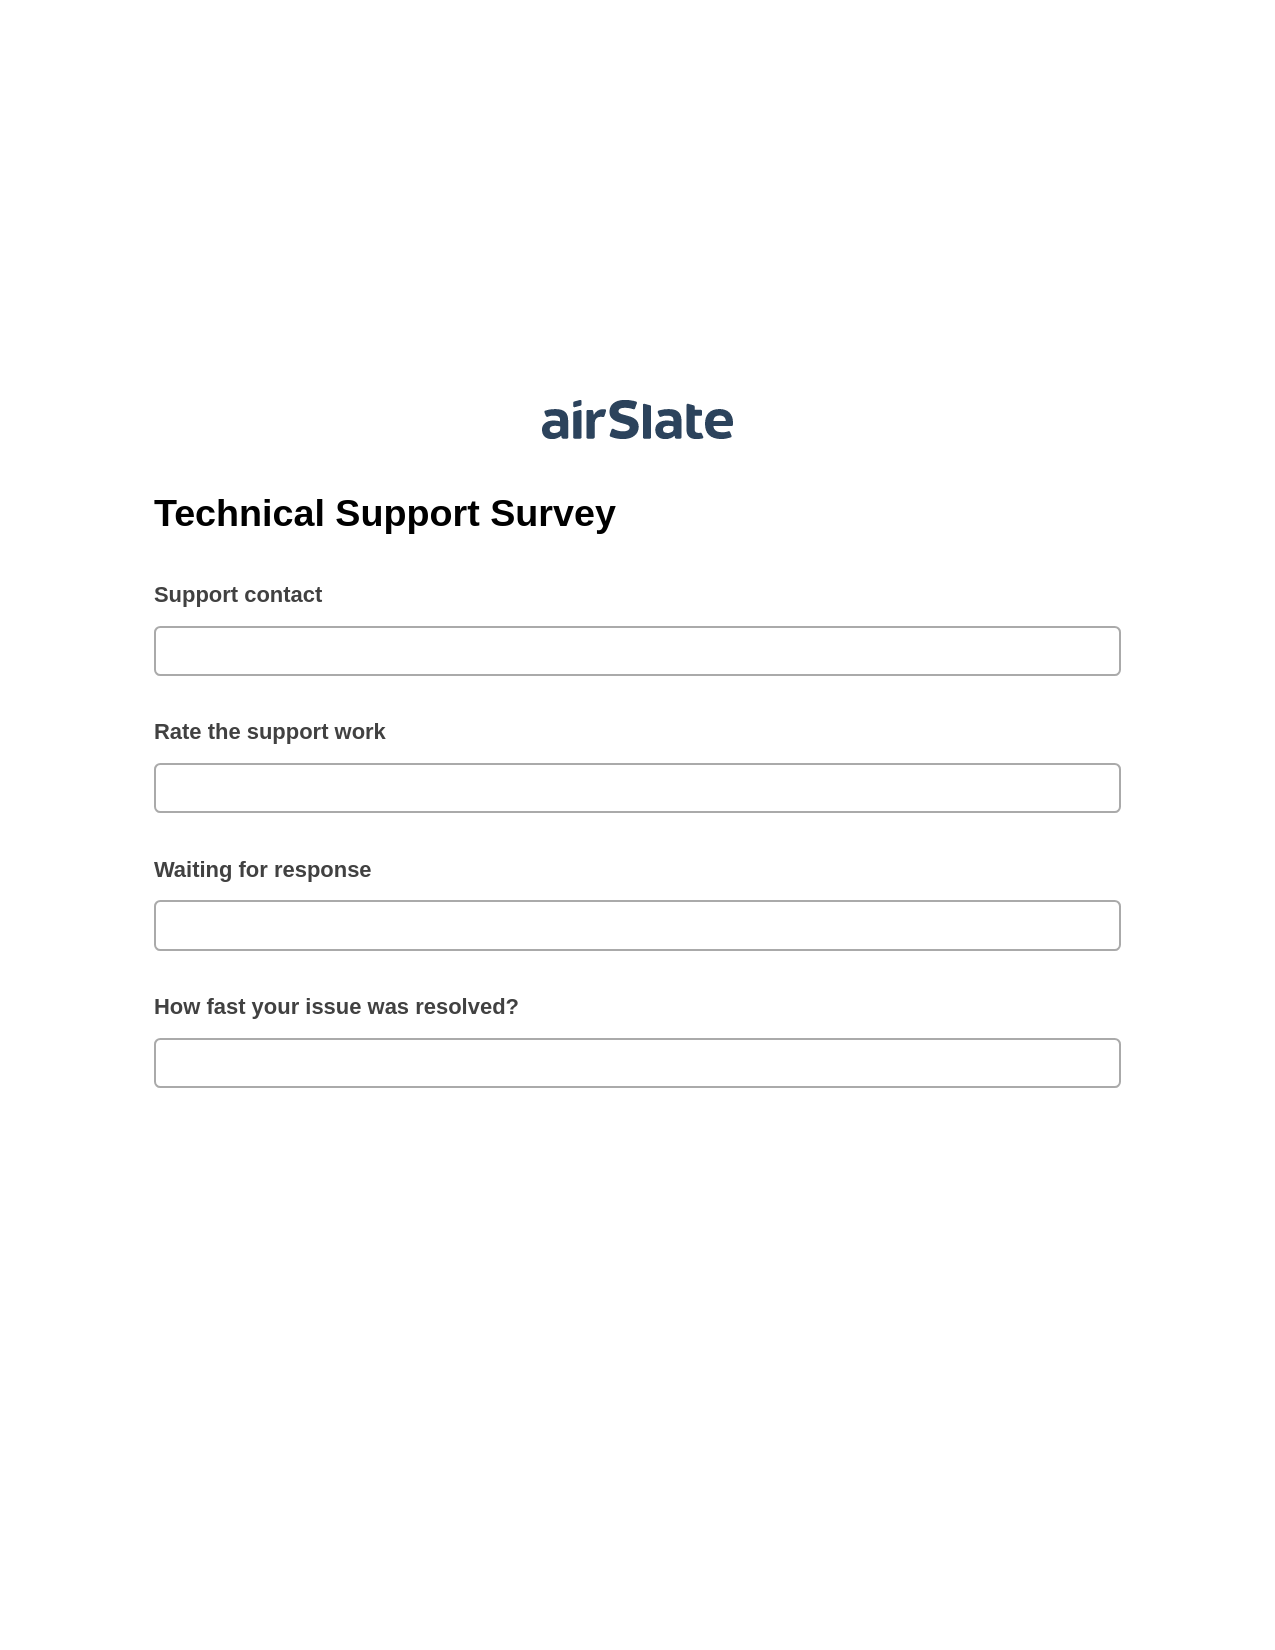 Multirole Technical Support Survey Pre-fill from Google Sheets Bot, Send a Slate to Salesforce Contact Bot, Archive to SharePoint Folder Bot